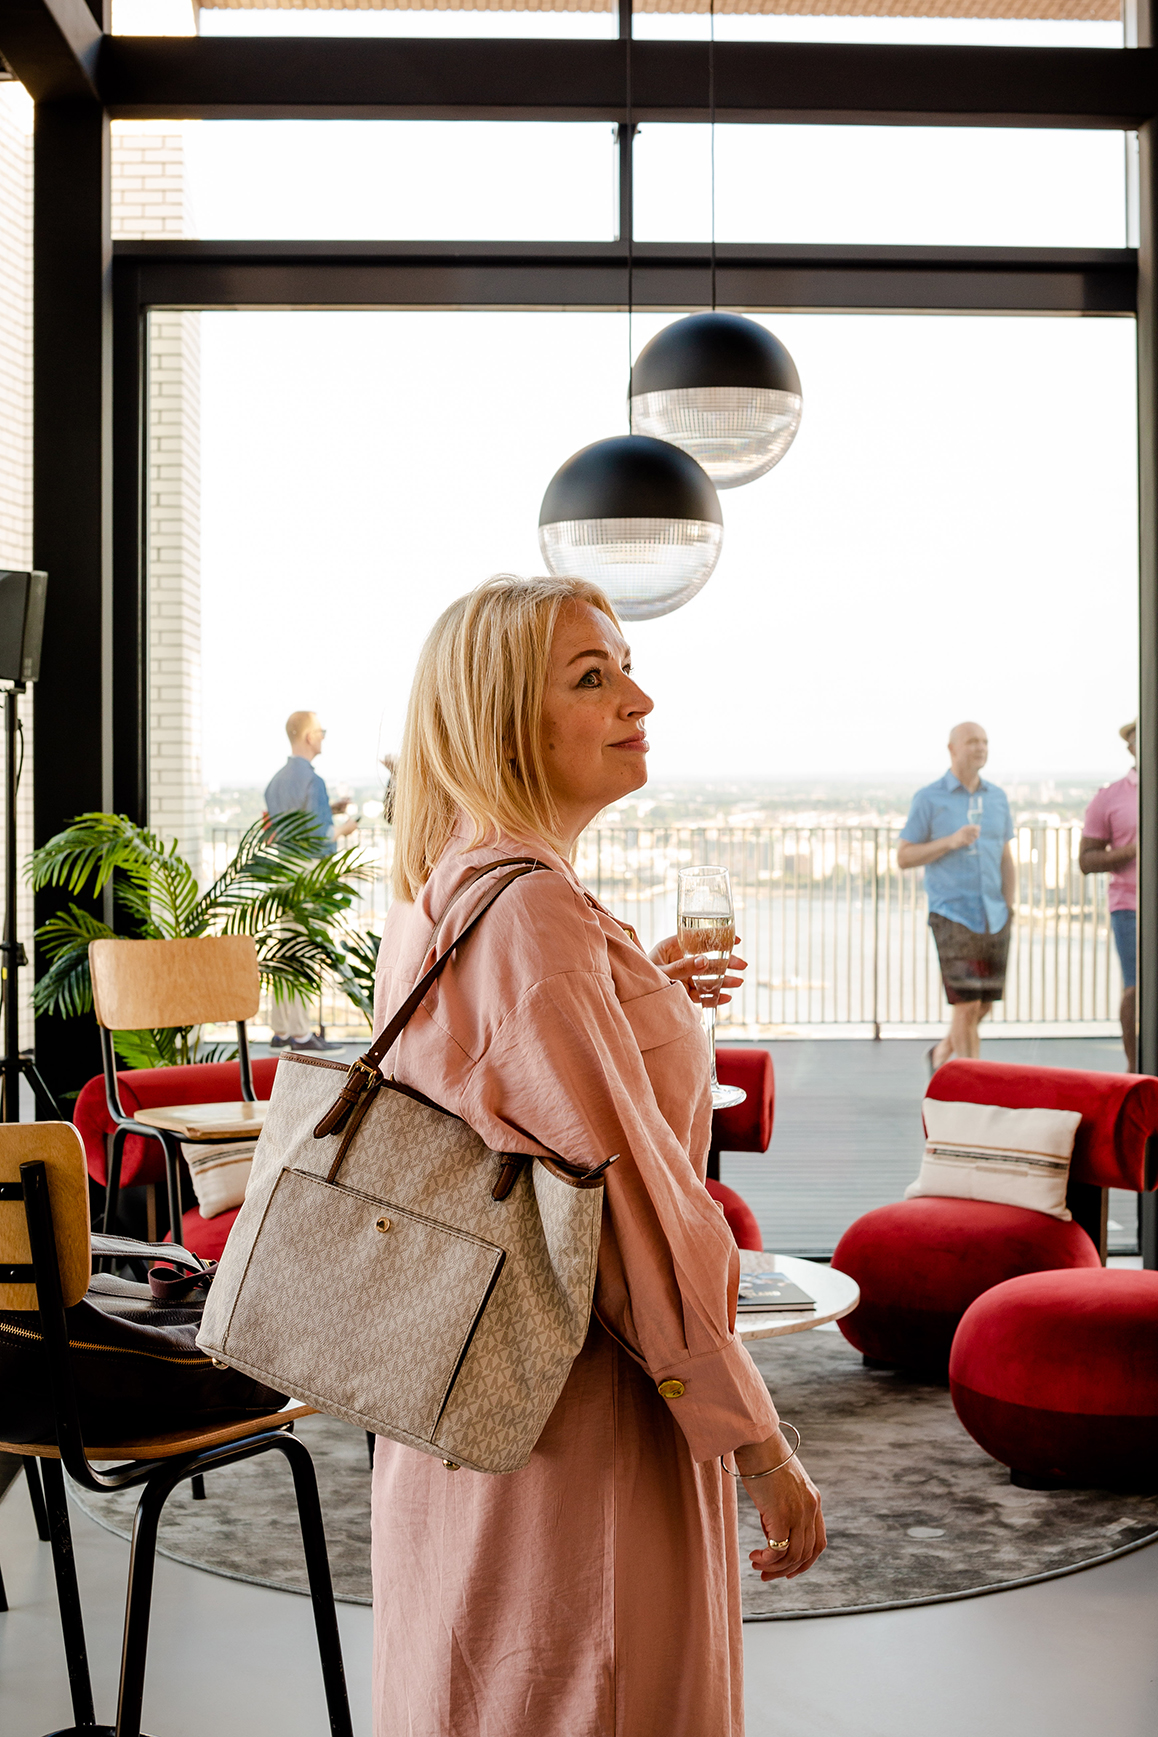 Guests were given the chance to explore the London City Island Penthouse ahead of the talk